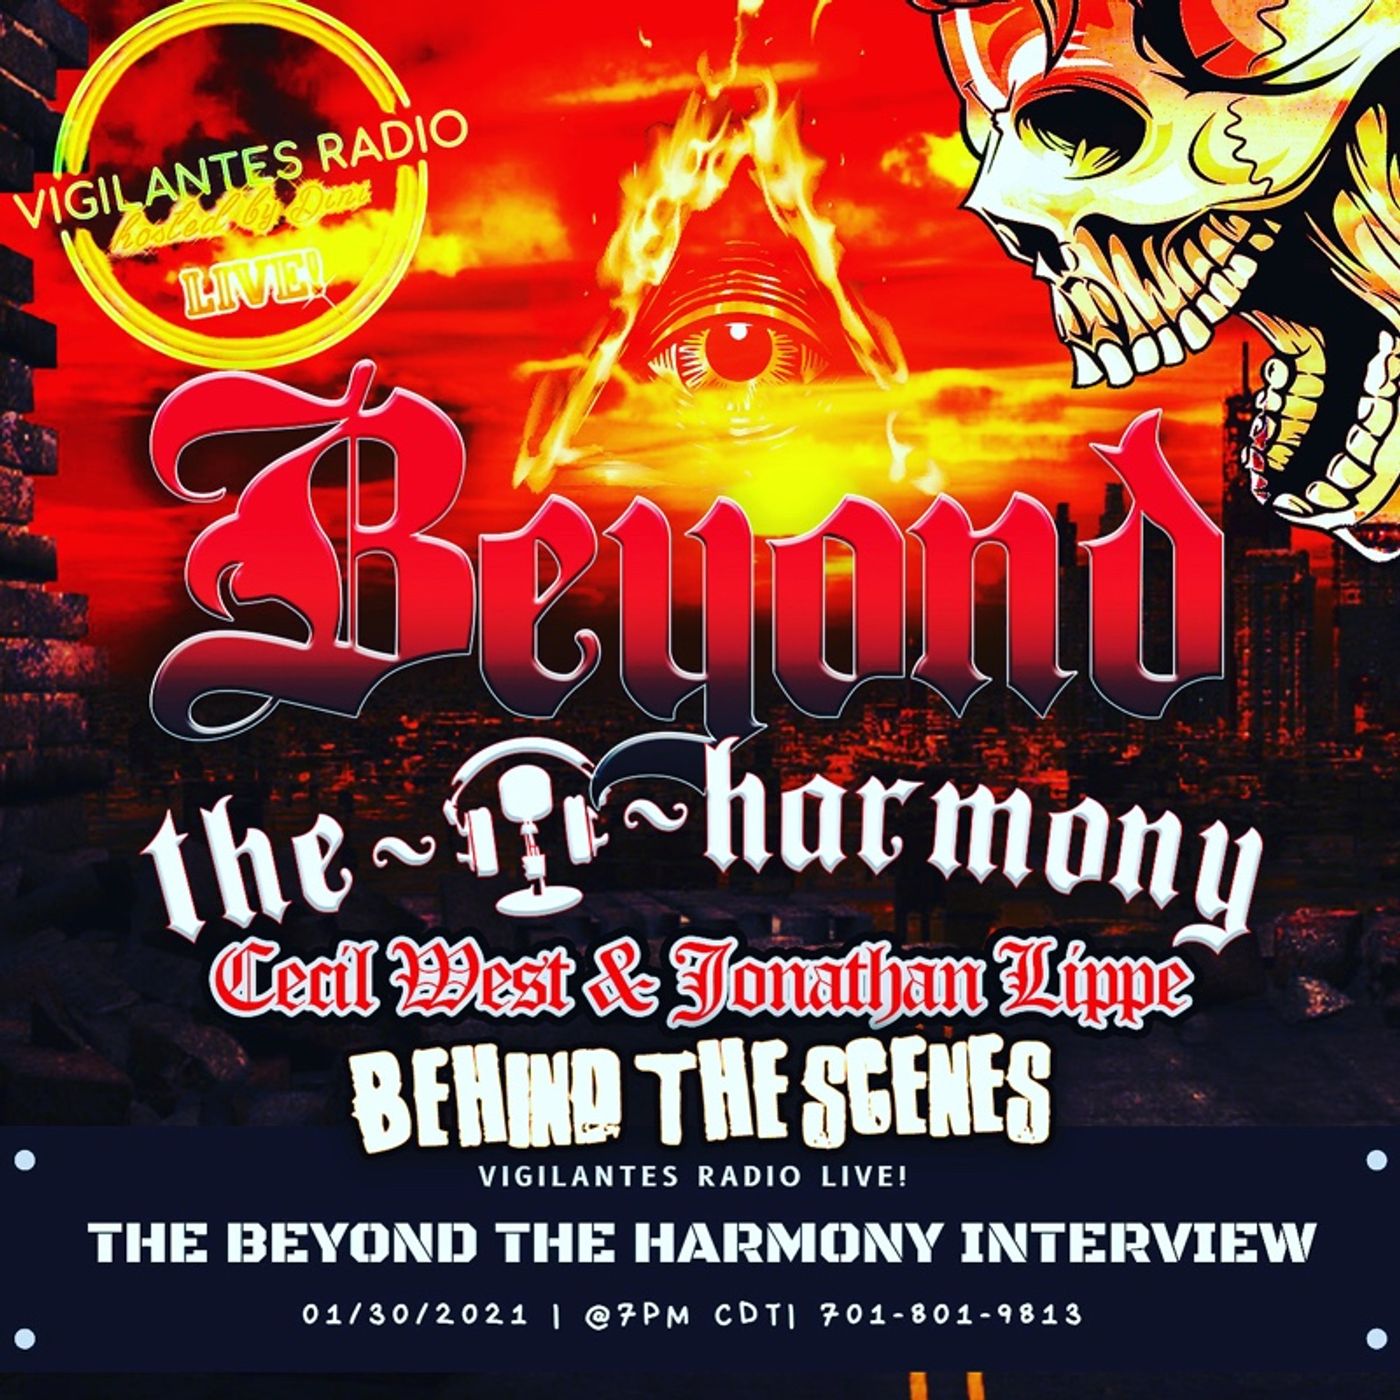 The Beyond The Harmony Interview PT3. Image